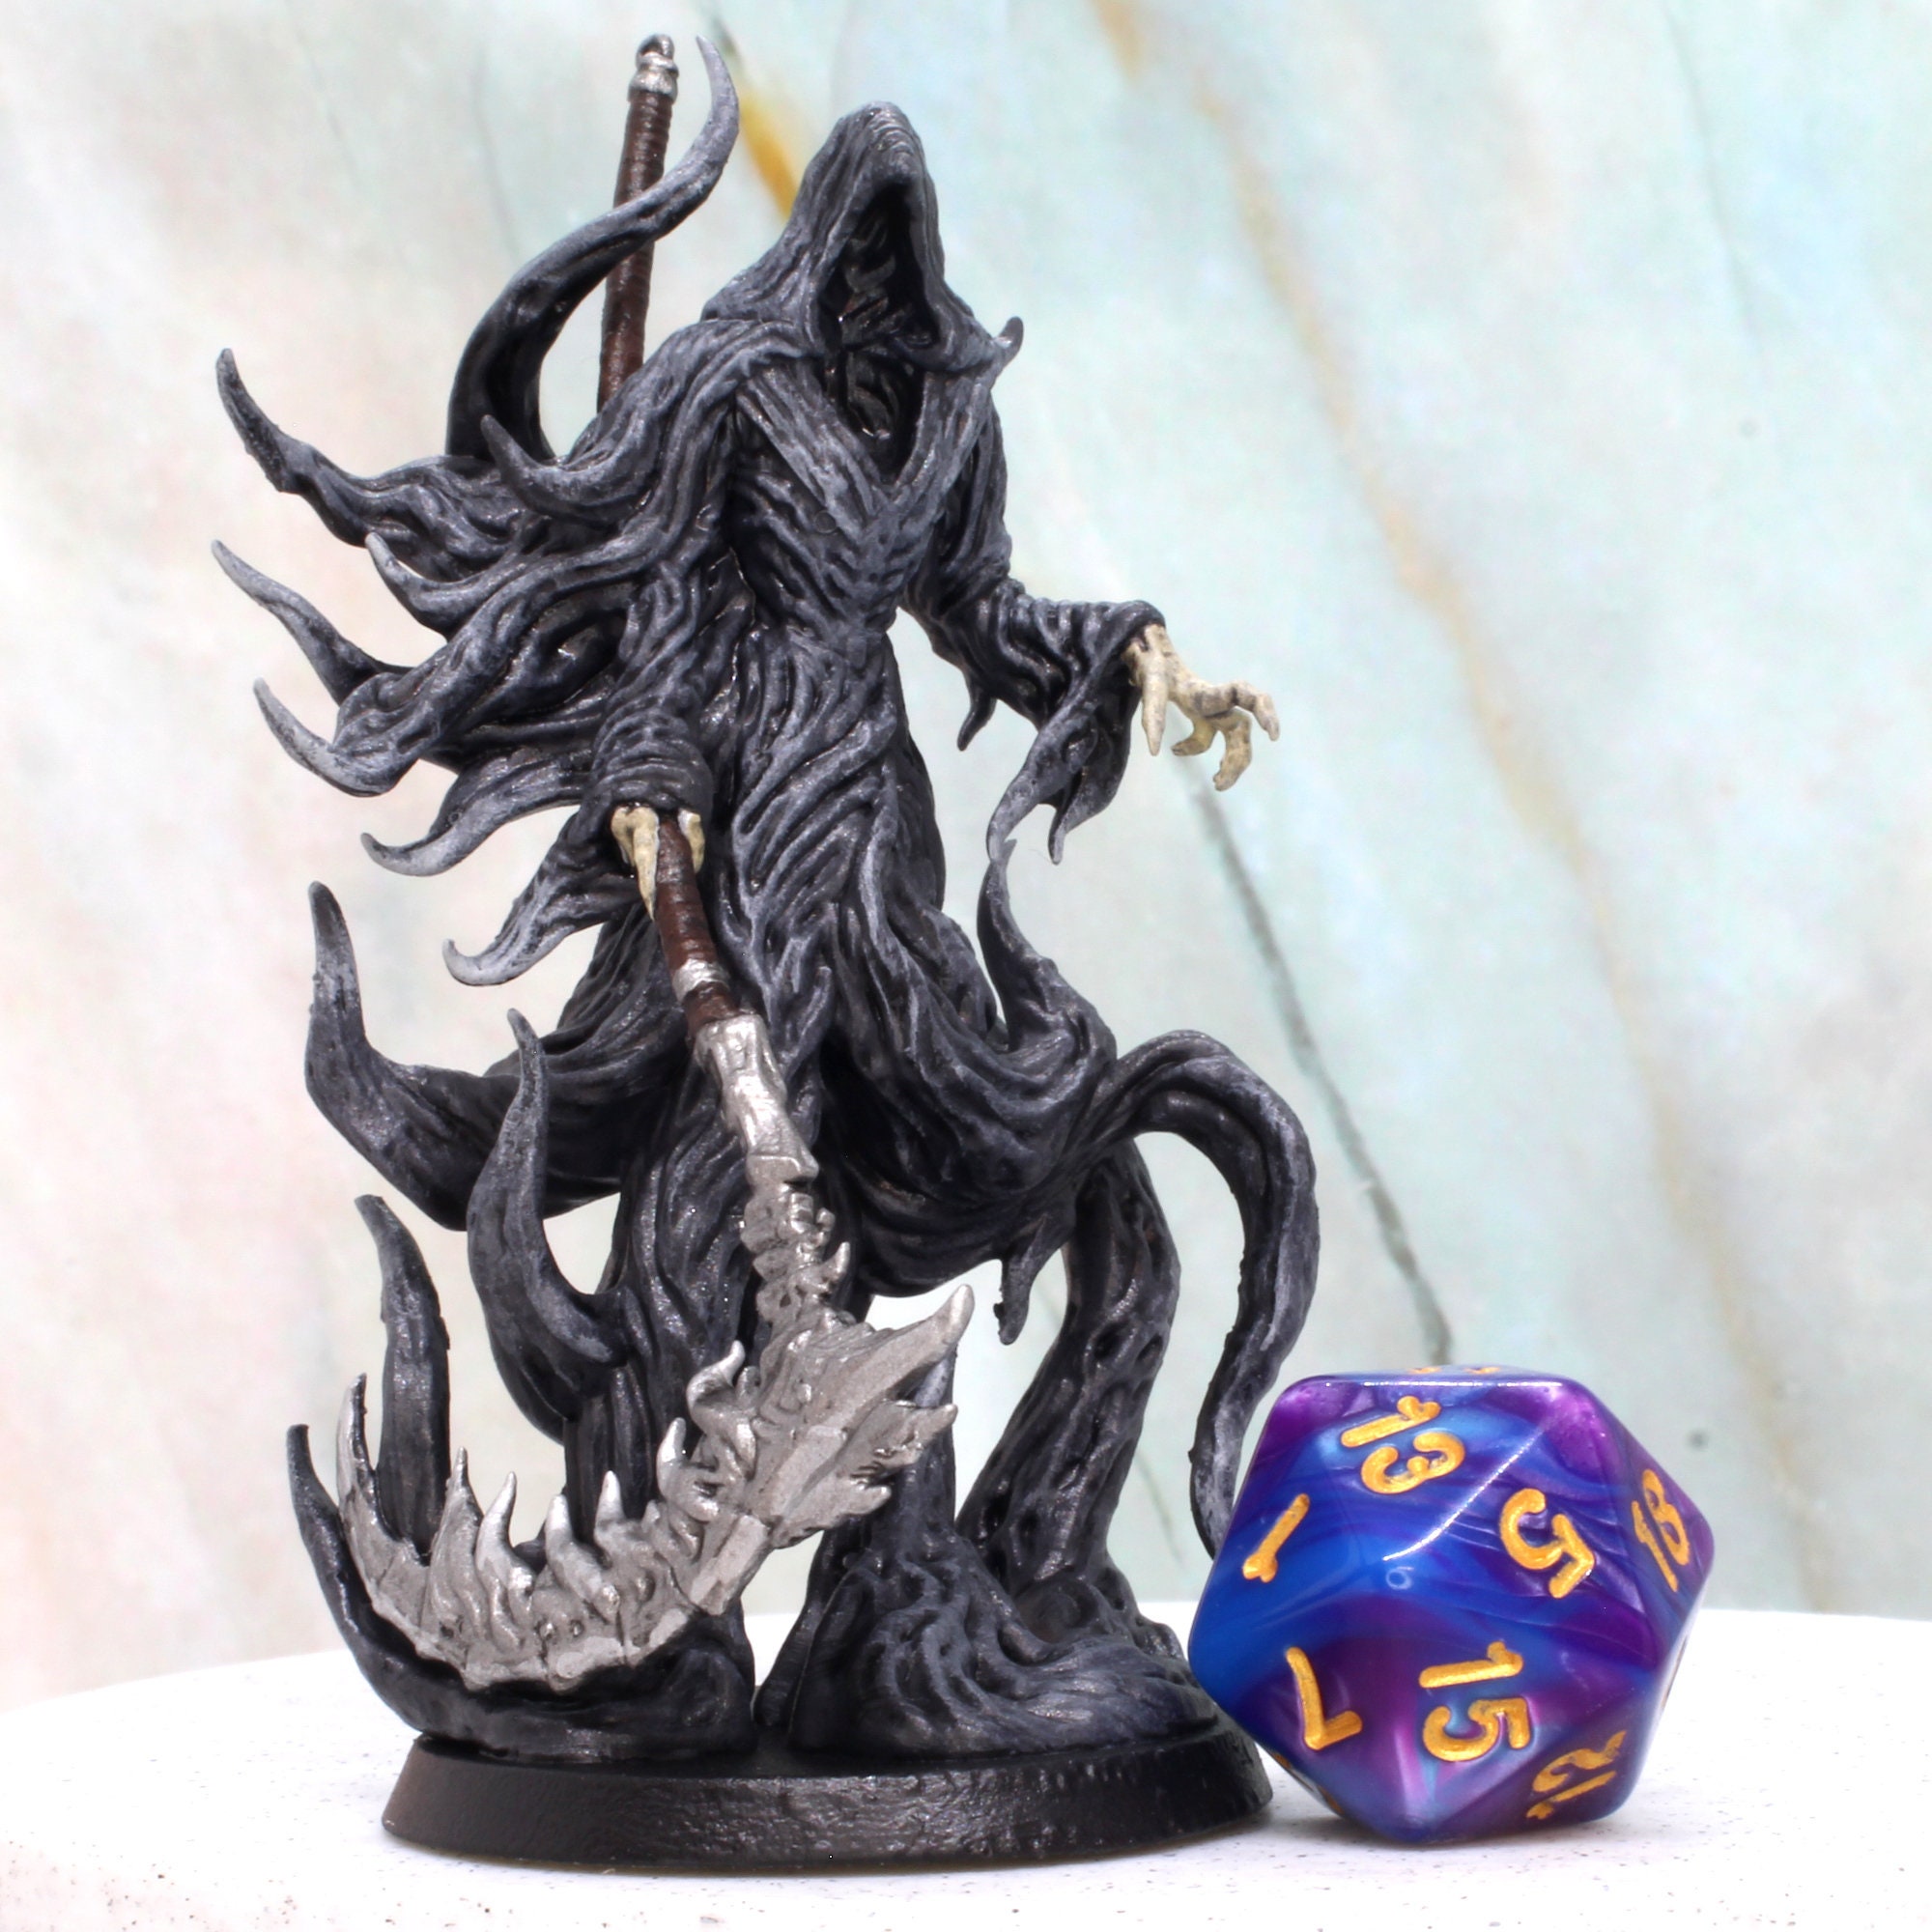 75mm tall TableTop Games Large size creature for DnD 2.75 inches tall 1:24 Scale Grim Reaper 3D Resin Print